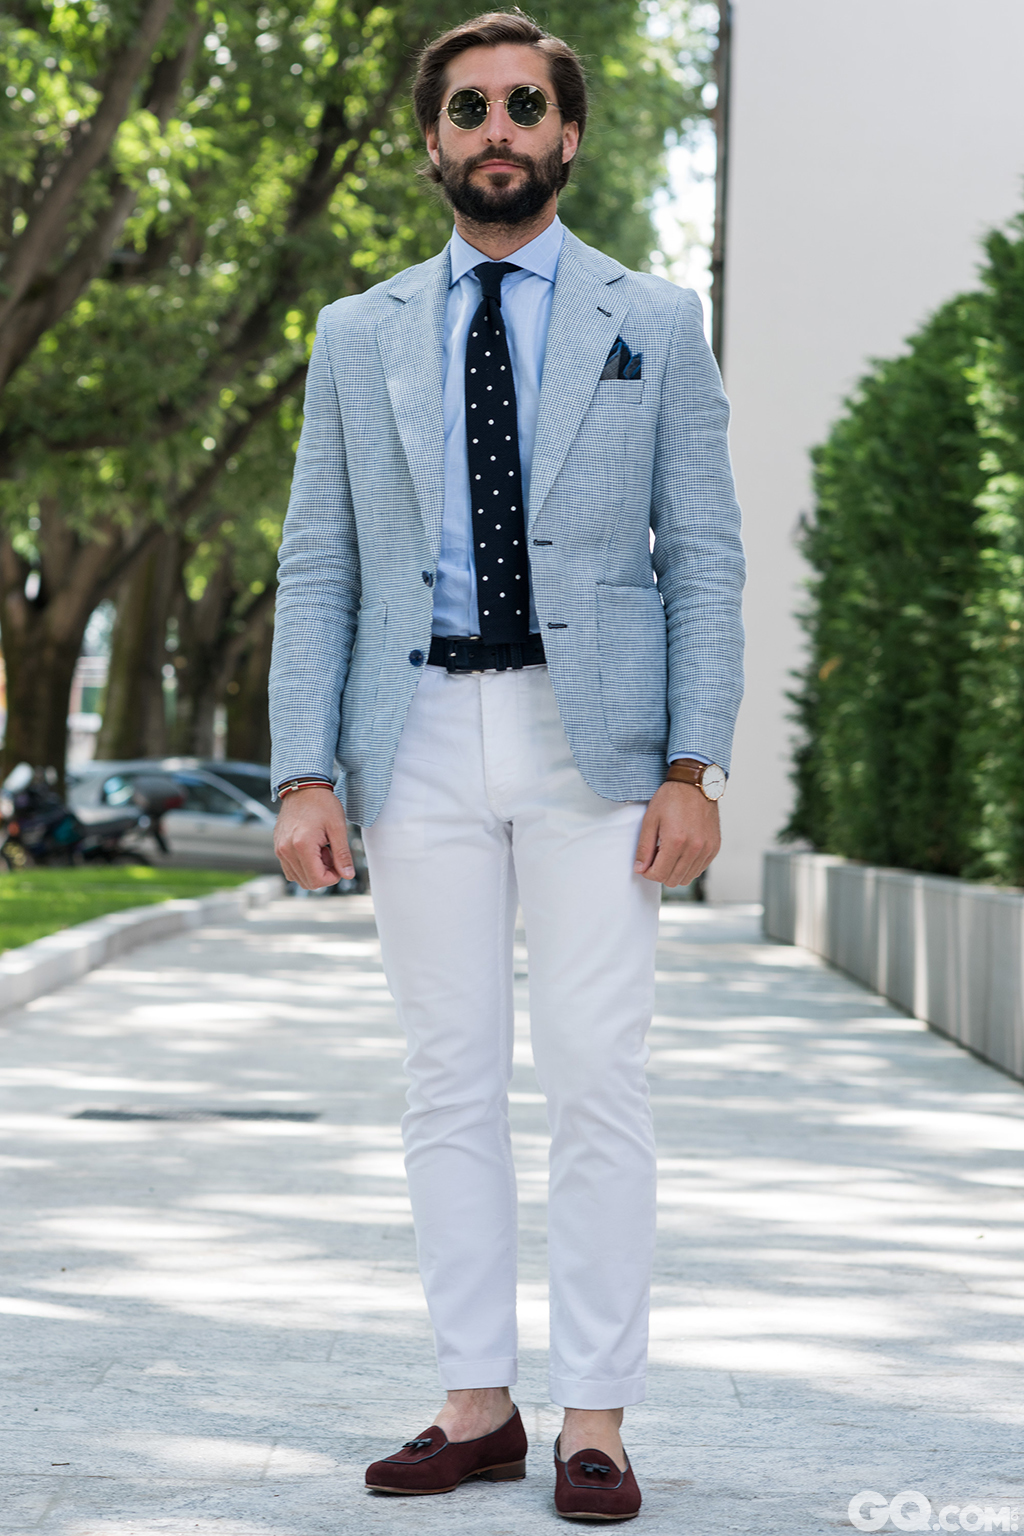 Alvaro
All look: Anglomania
Shoes: Harris
Cheapest piece: My tie
Oldest piece: My jacket from last summer


Inspiration: I prefer to stay in white and blue during these hot days. I like to dress comfortable.(我更喜欢在这炎热的天气里待着蓝天白云下。我喜欢舒适的穿着)
